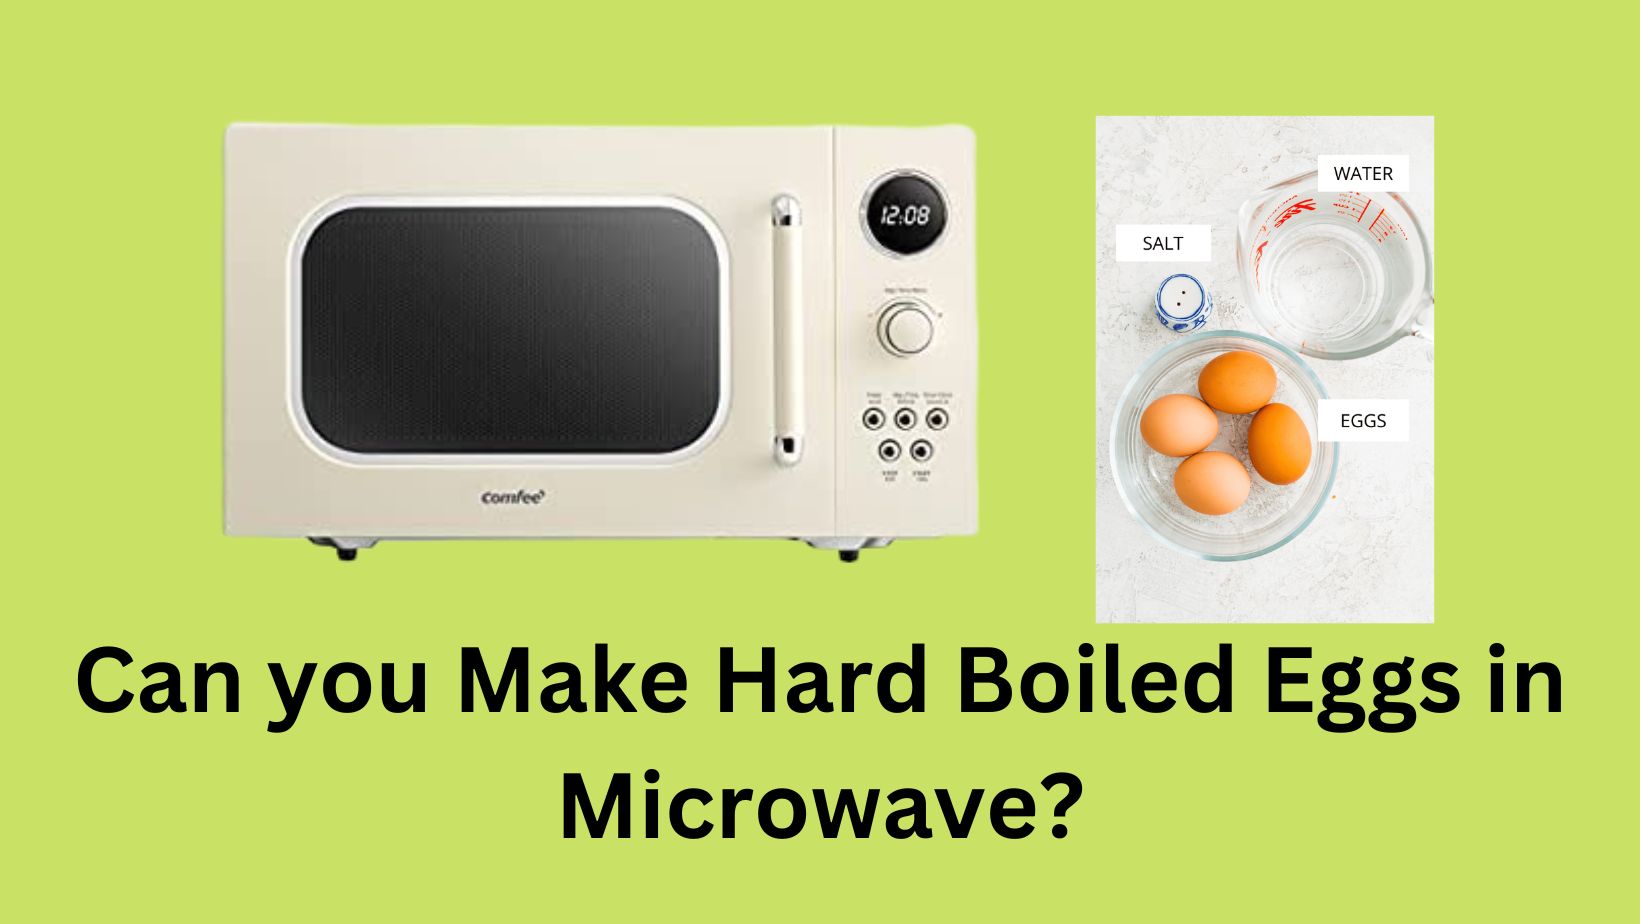 Can you Make Hard Boiled Eggs in Microwave?